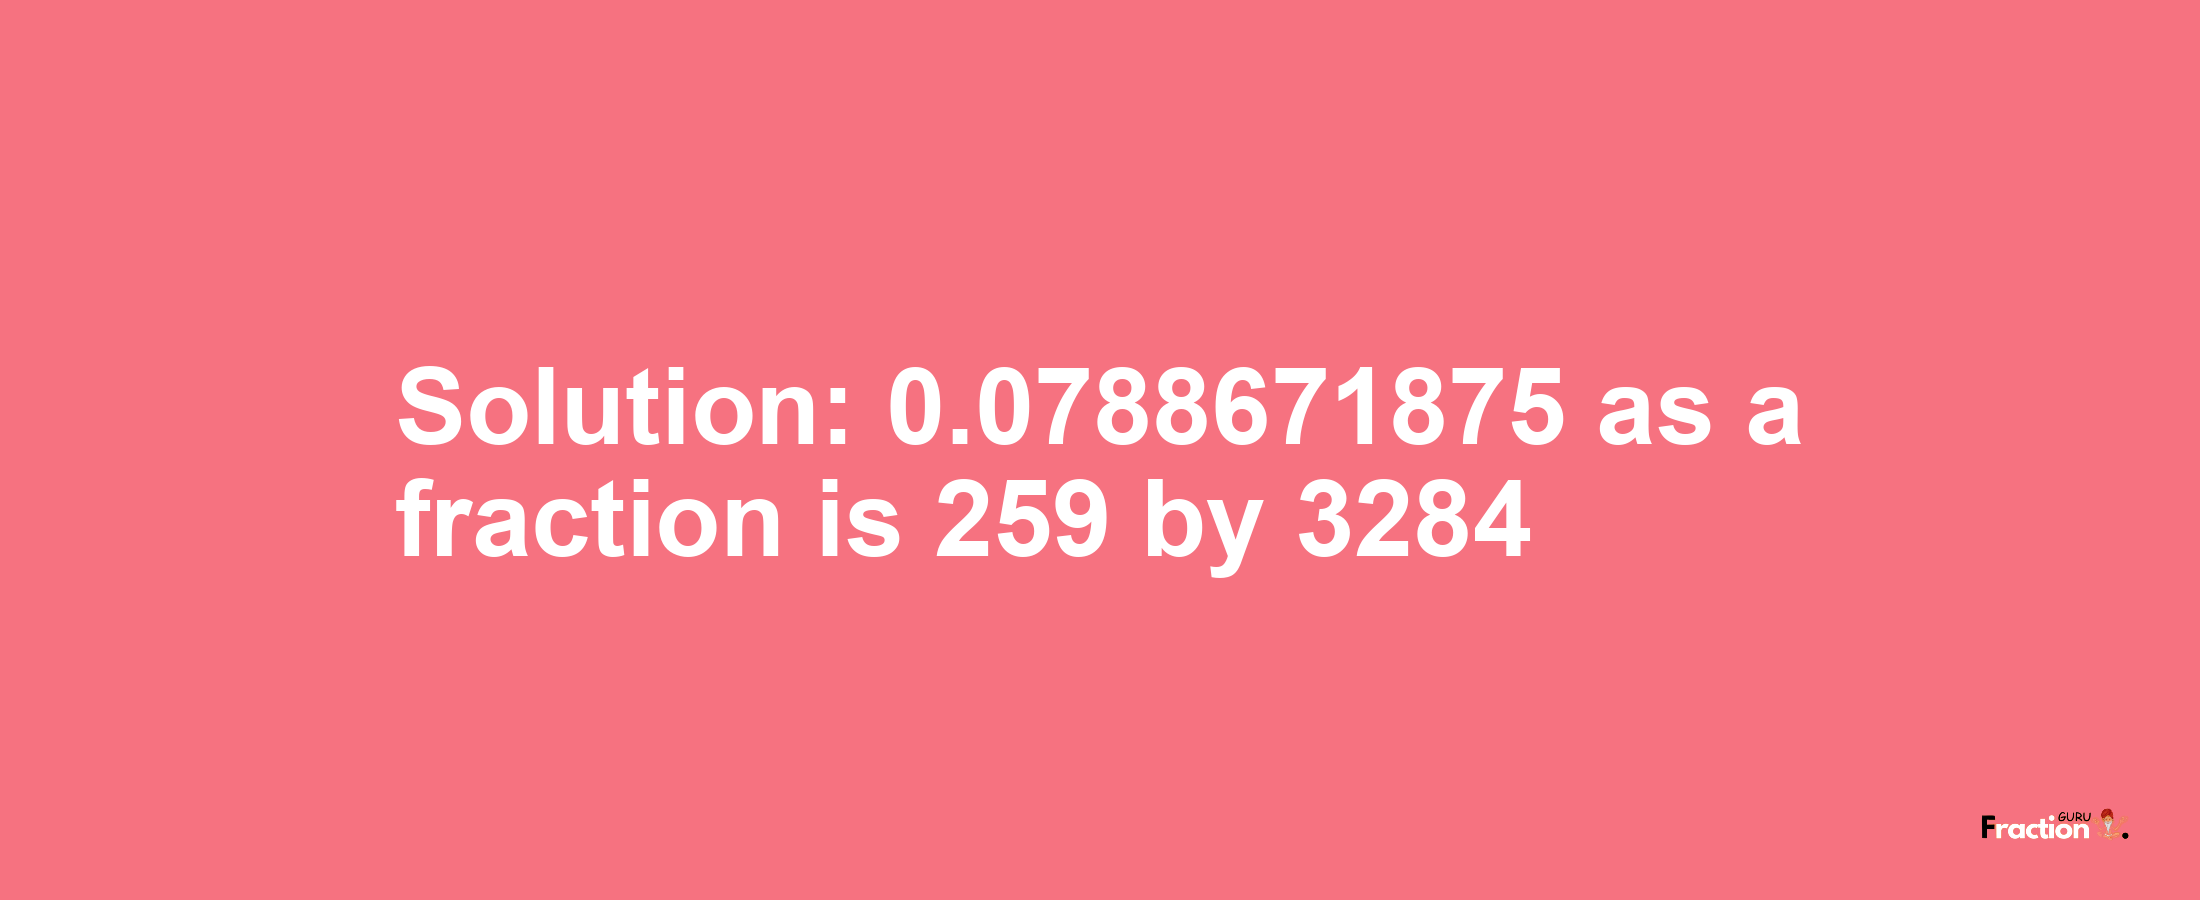 Solution:0.0788671875 as a fraction is 259/3284